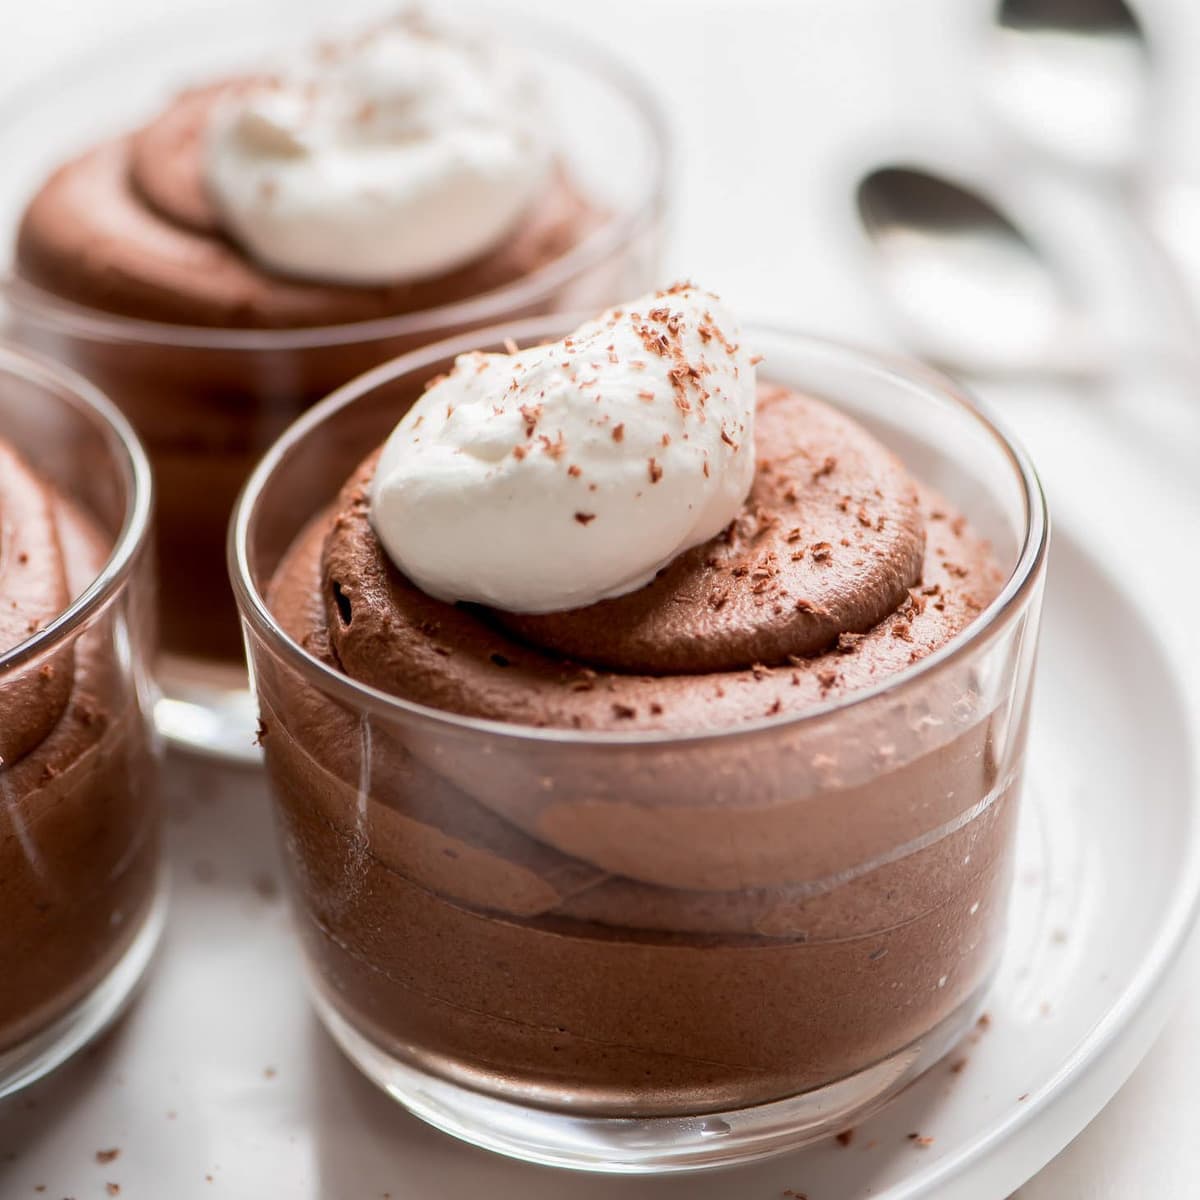 Chocolate Thanksgiving desserts - Chocolate mousse